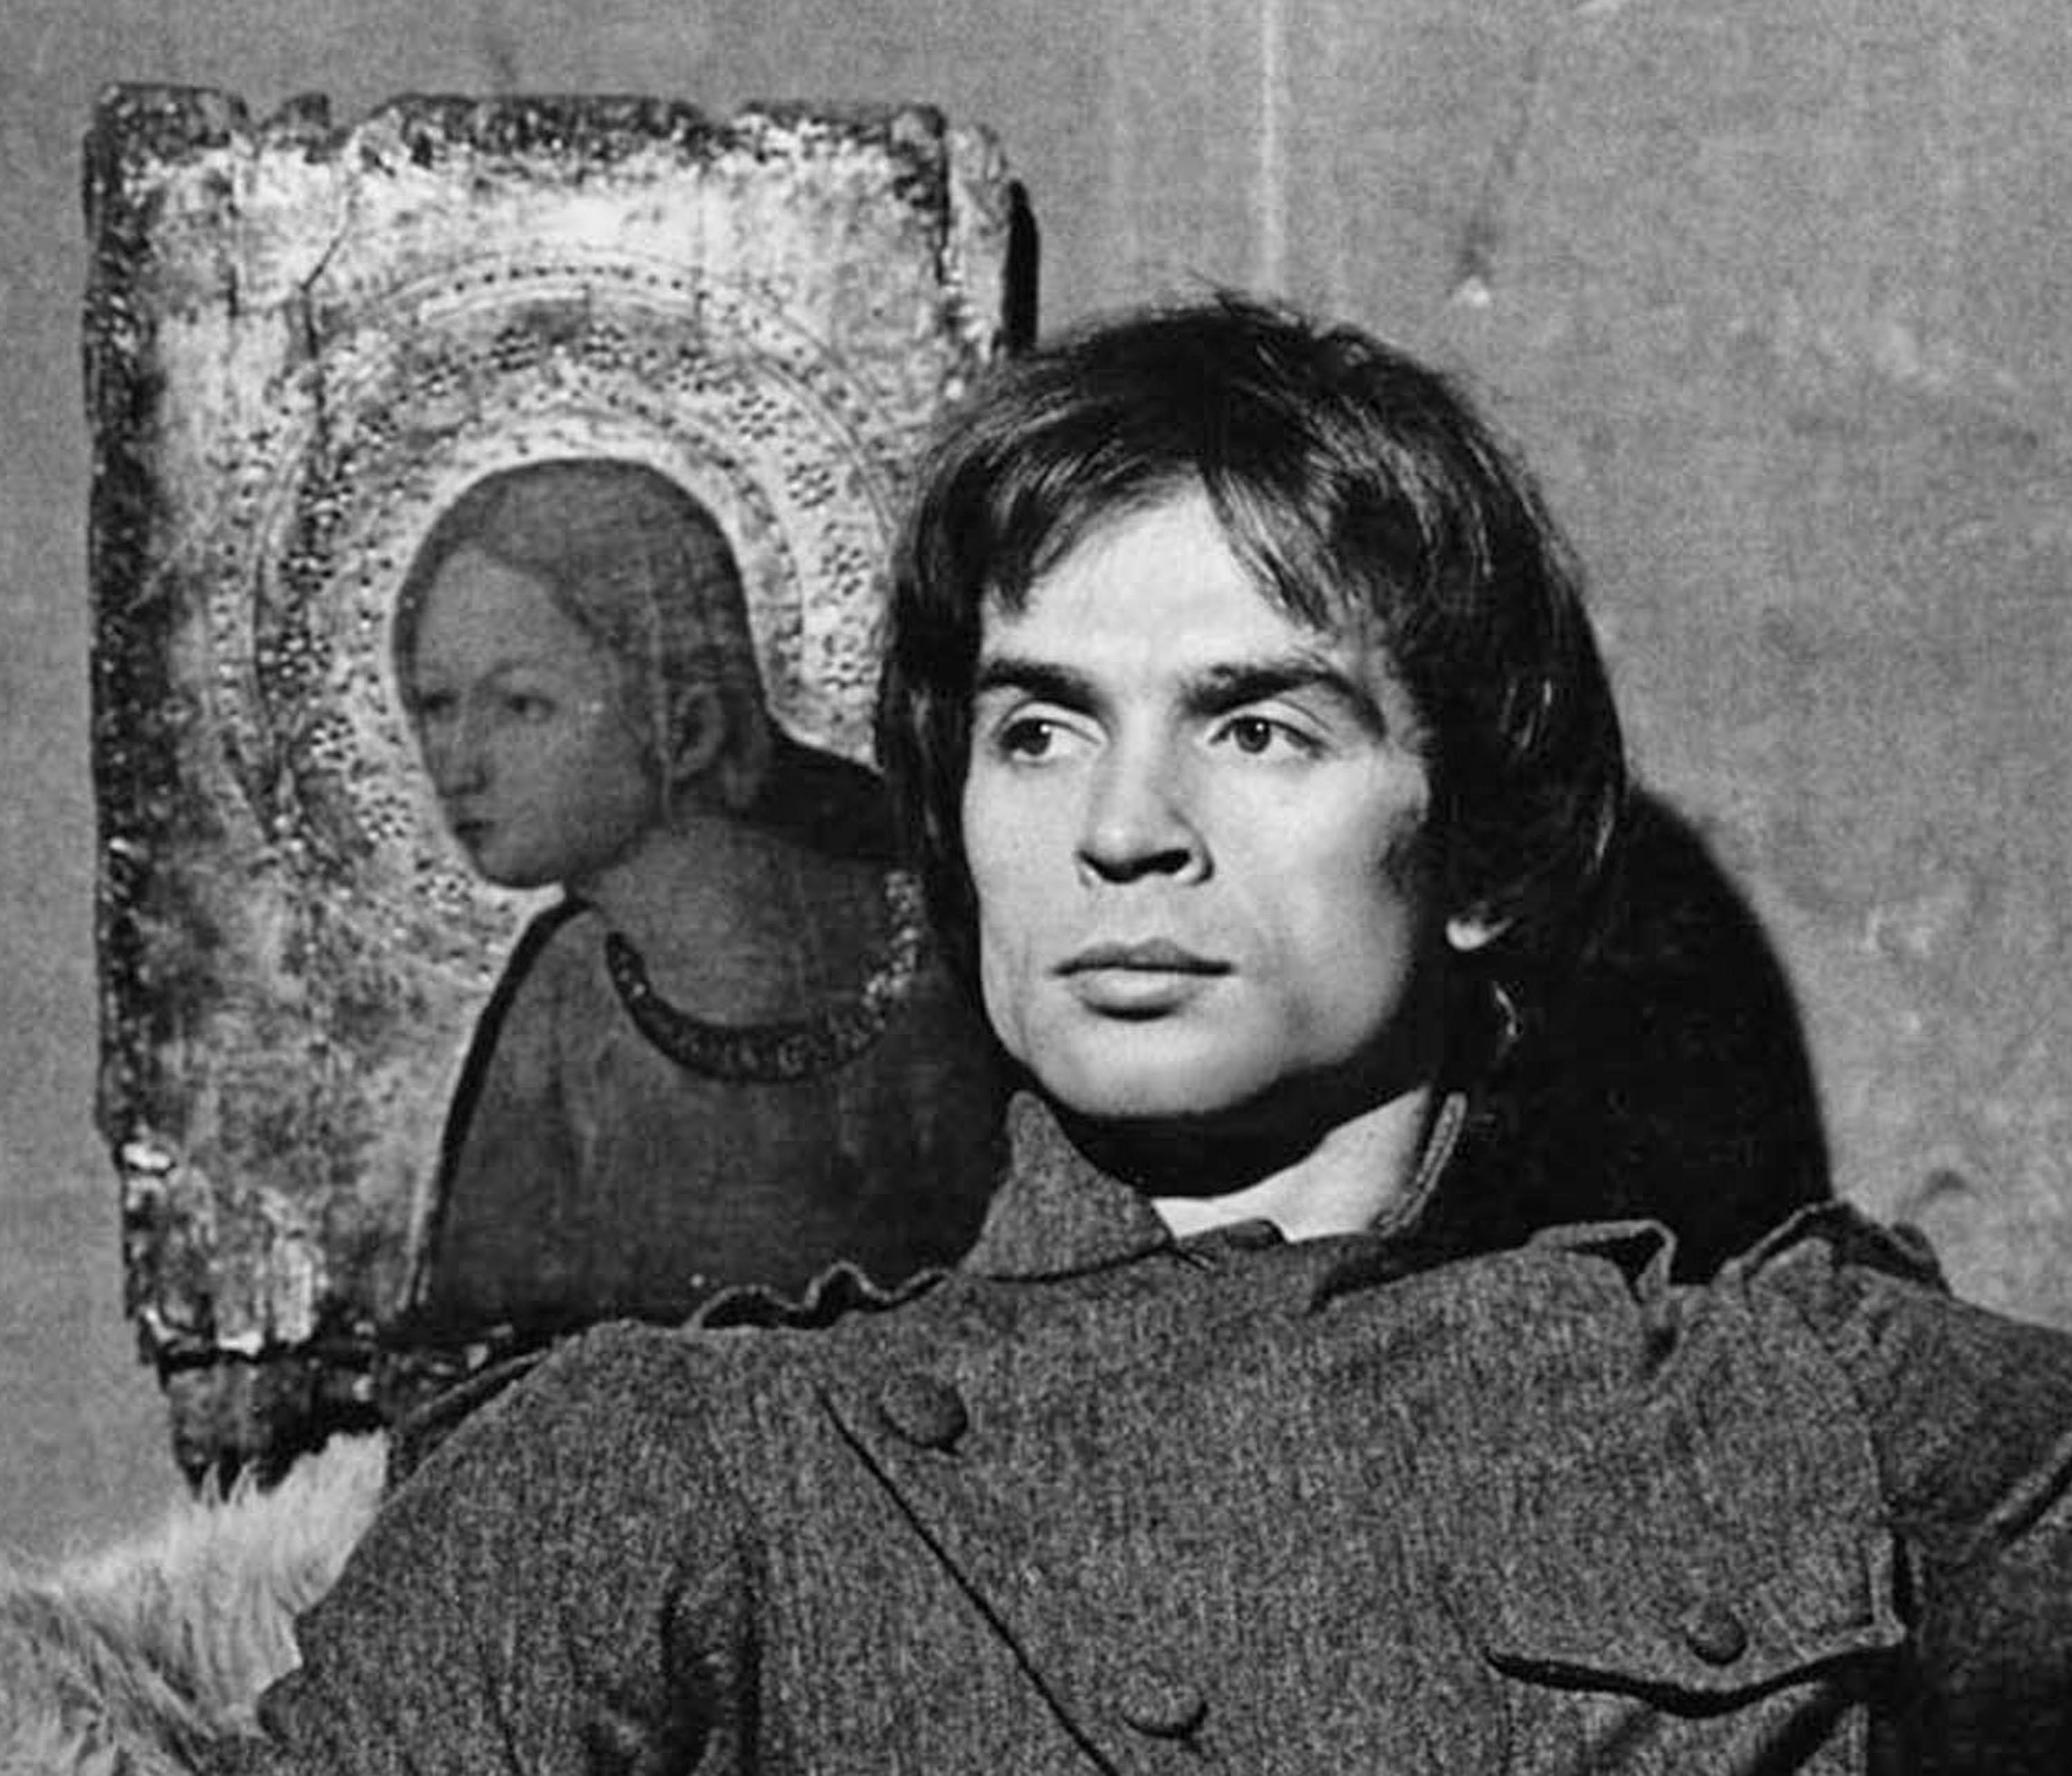 Rudolf Nureyev photographed at his friend's apartment, 1970  - Photograph by Jack Mitchell